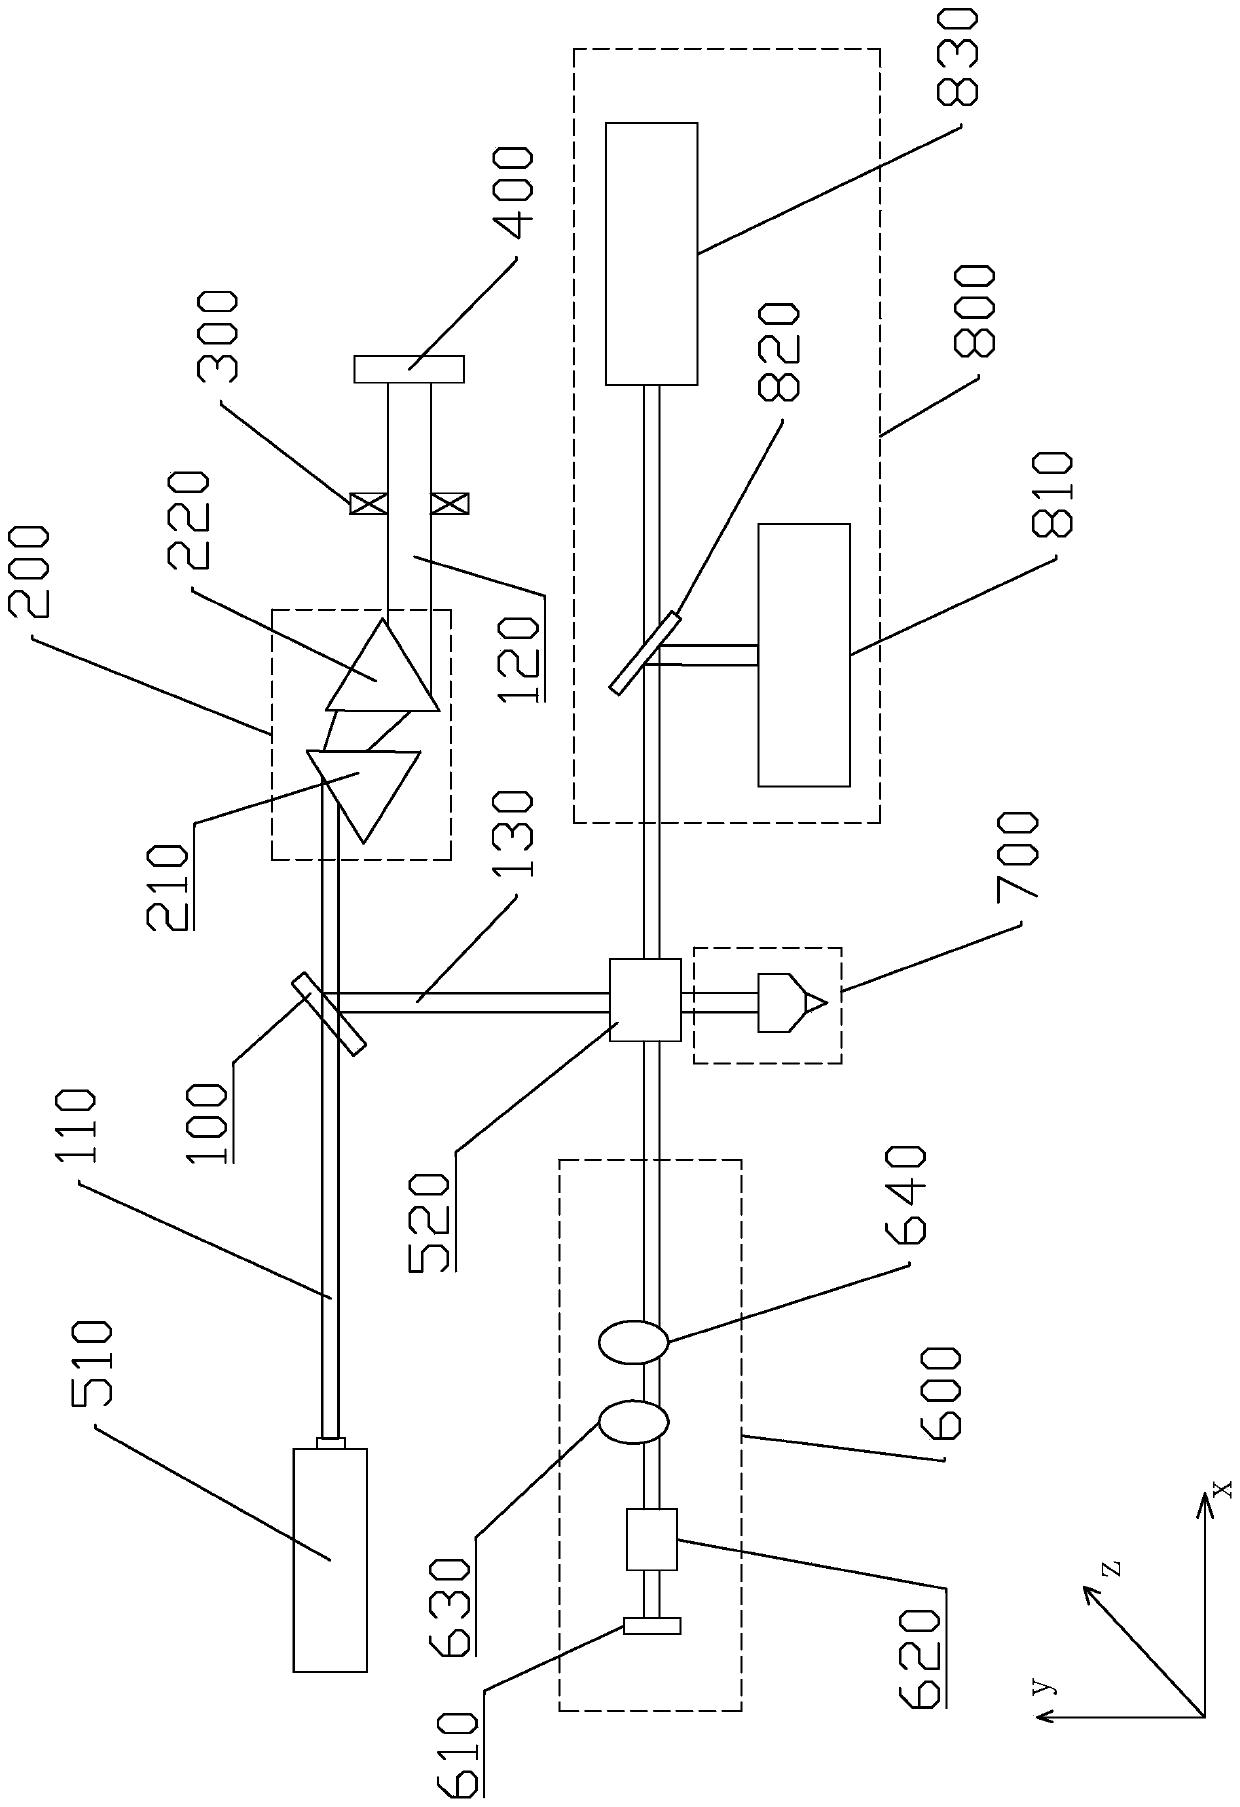 Optical coherence chromatography system with adjustable working wavelength and wide bandwidth range